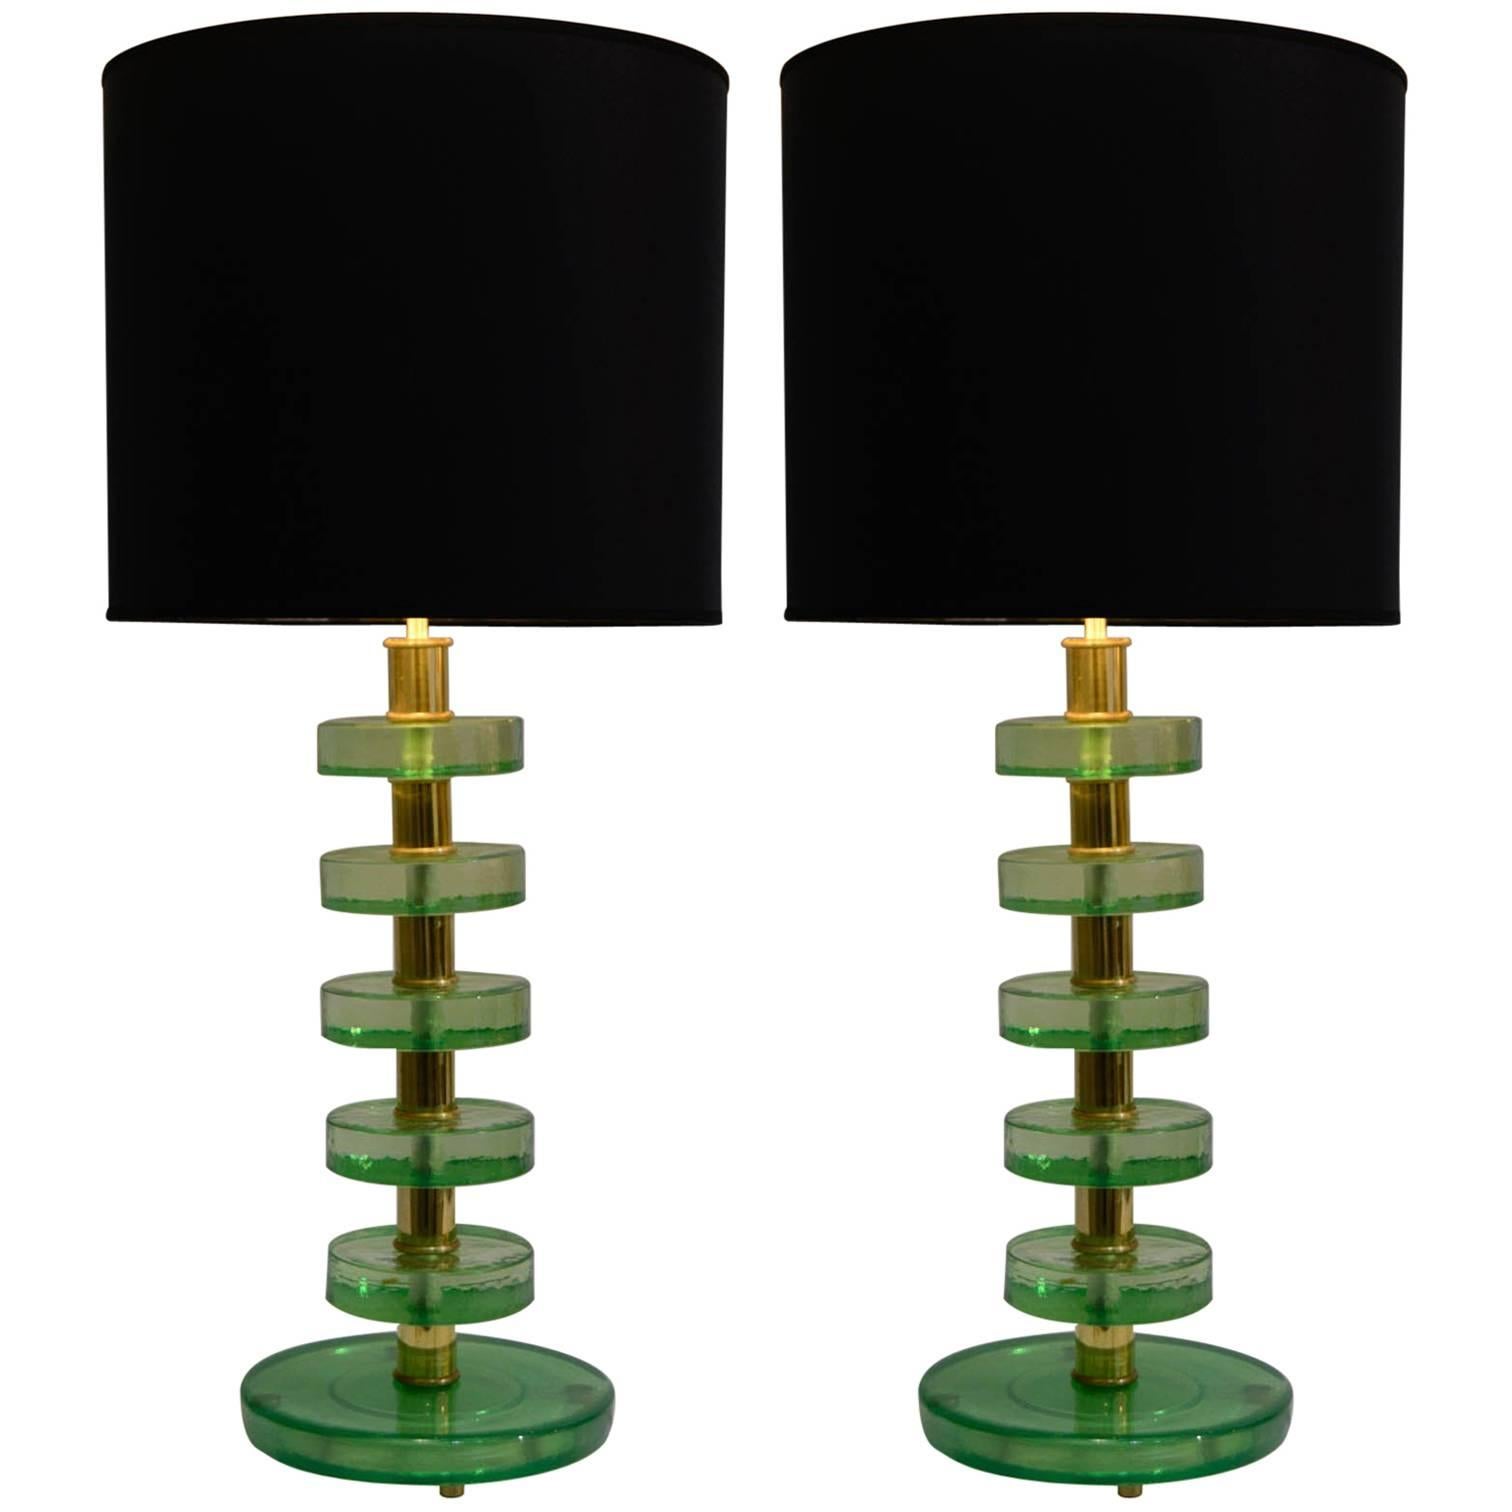 Pair of Lamps in the Style of Jacques Adnet